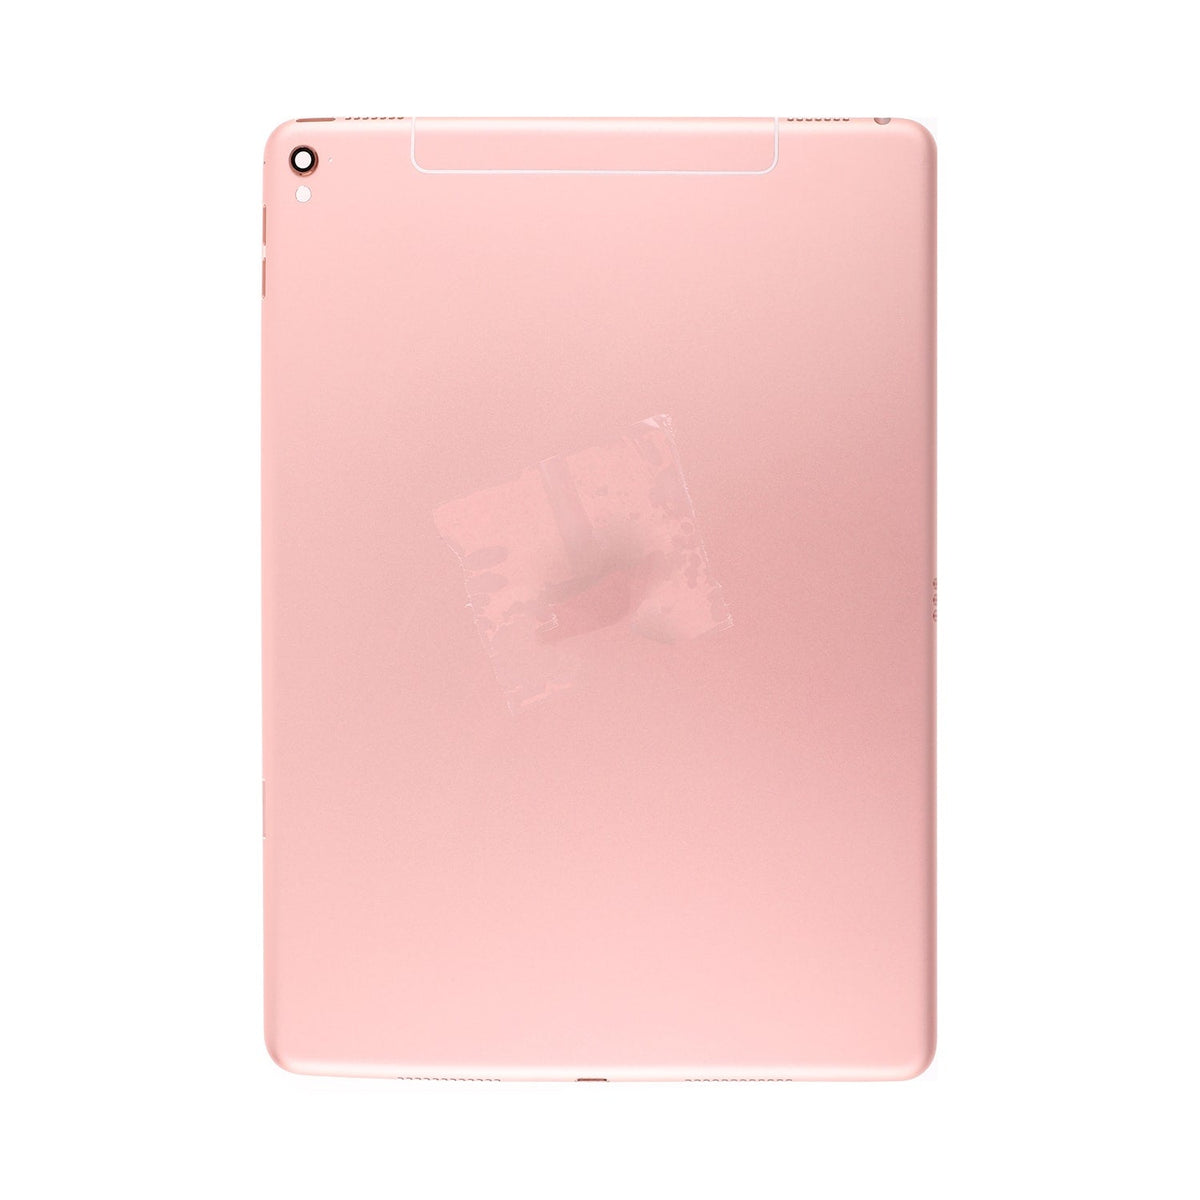 BACK COVER WIFI + CELLULAR VERSION FOR IPAD PRO 9.7"- ROSE